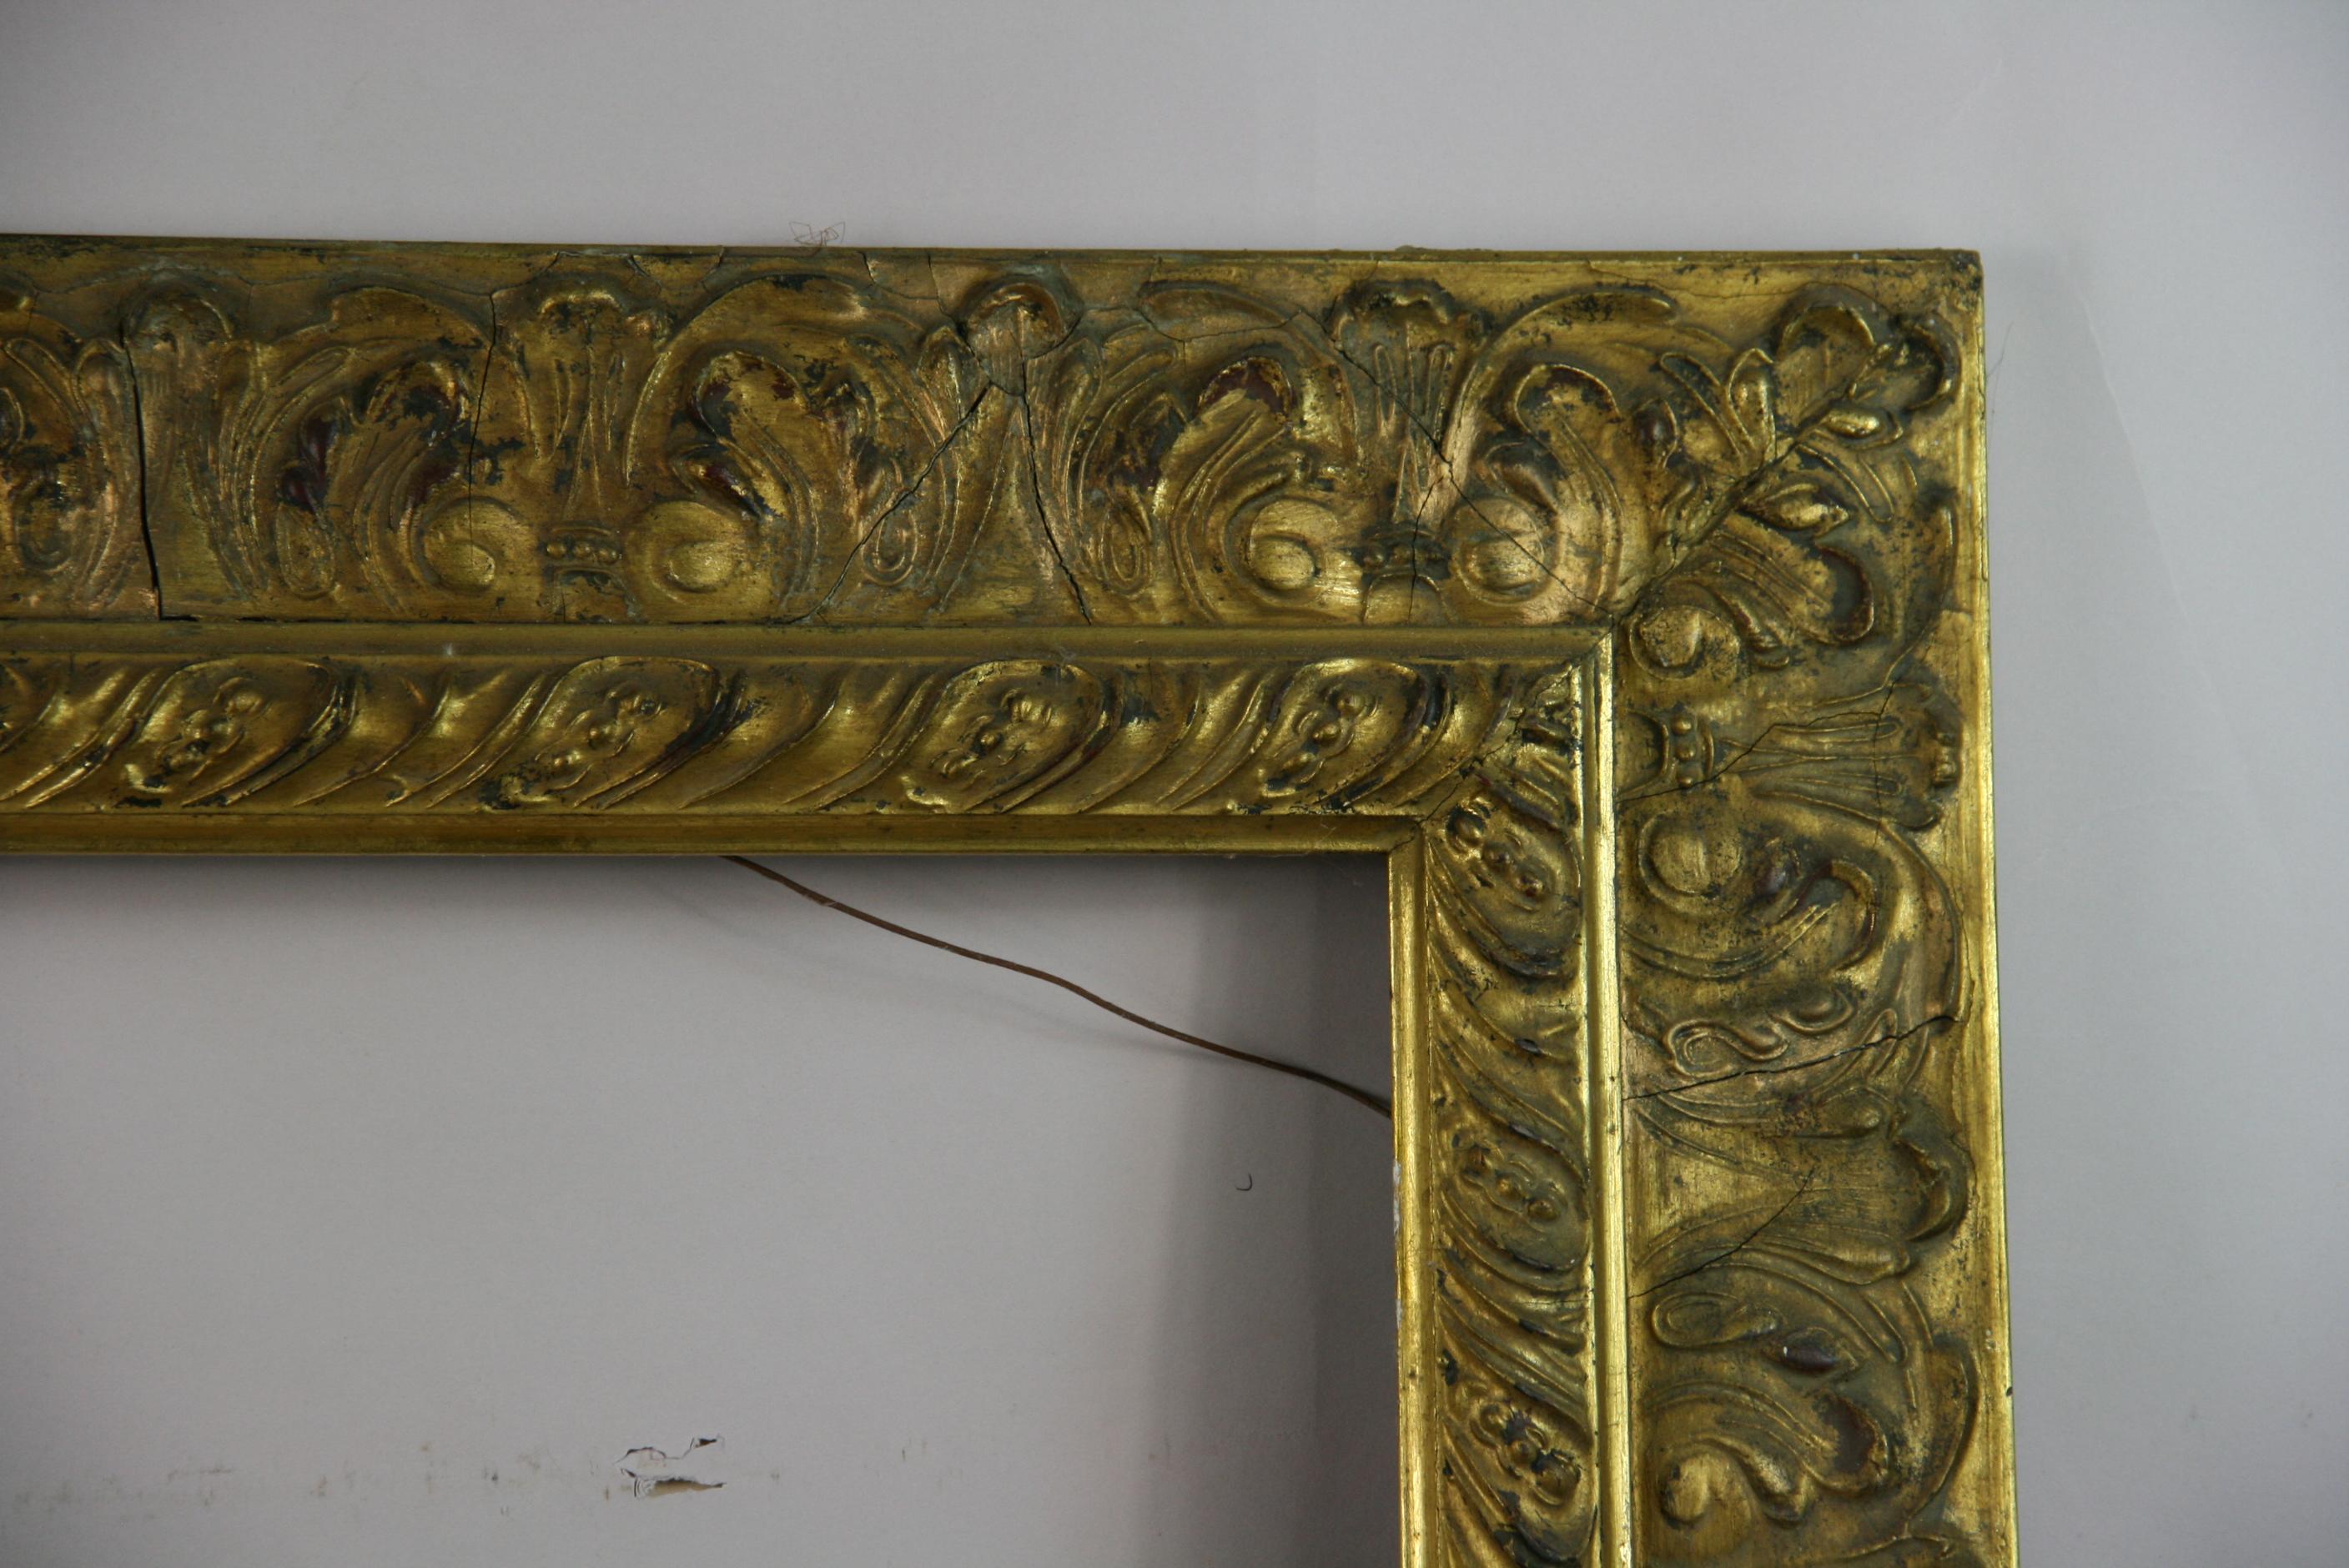 1-128 large Italian frames with elaborate cast detailing.
Overall size 40 x 34 x 1